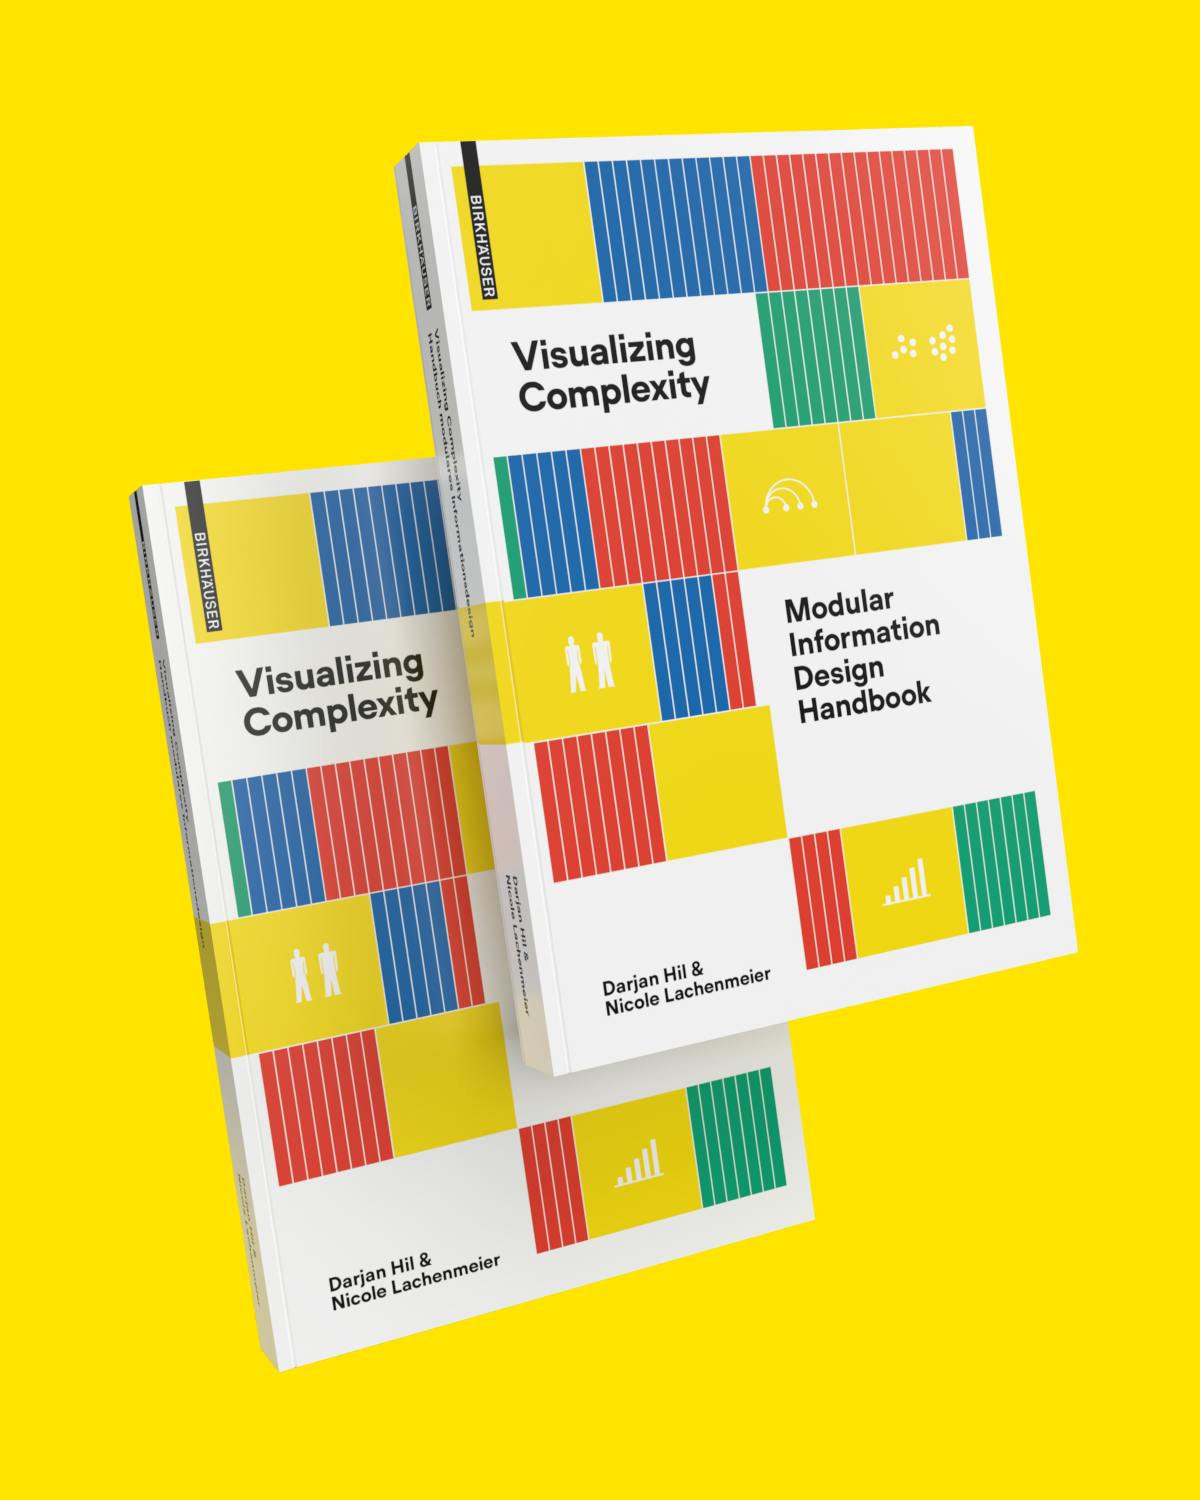 Book cover of "Visualizing complexity – Modular Information Design Handbook" by Superdot Studio